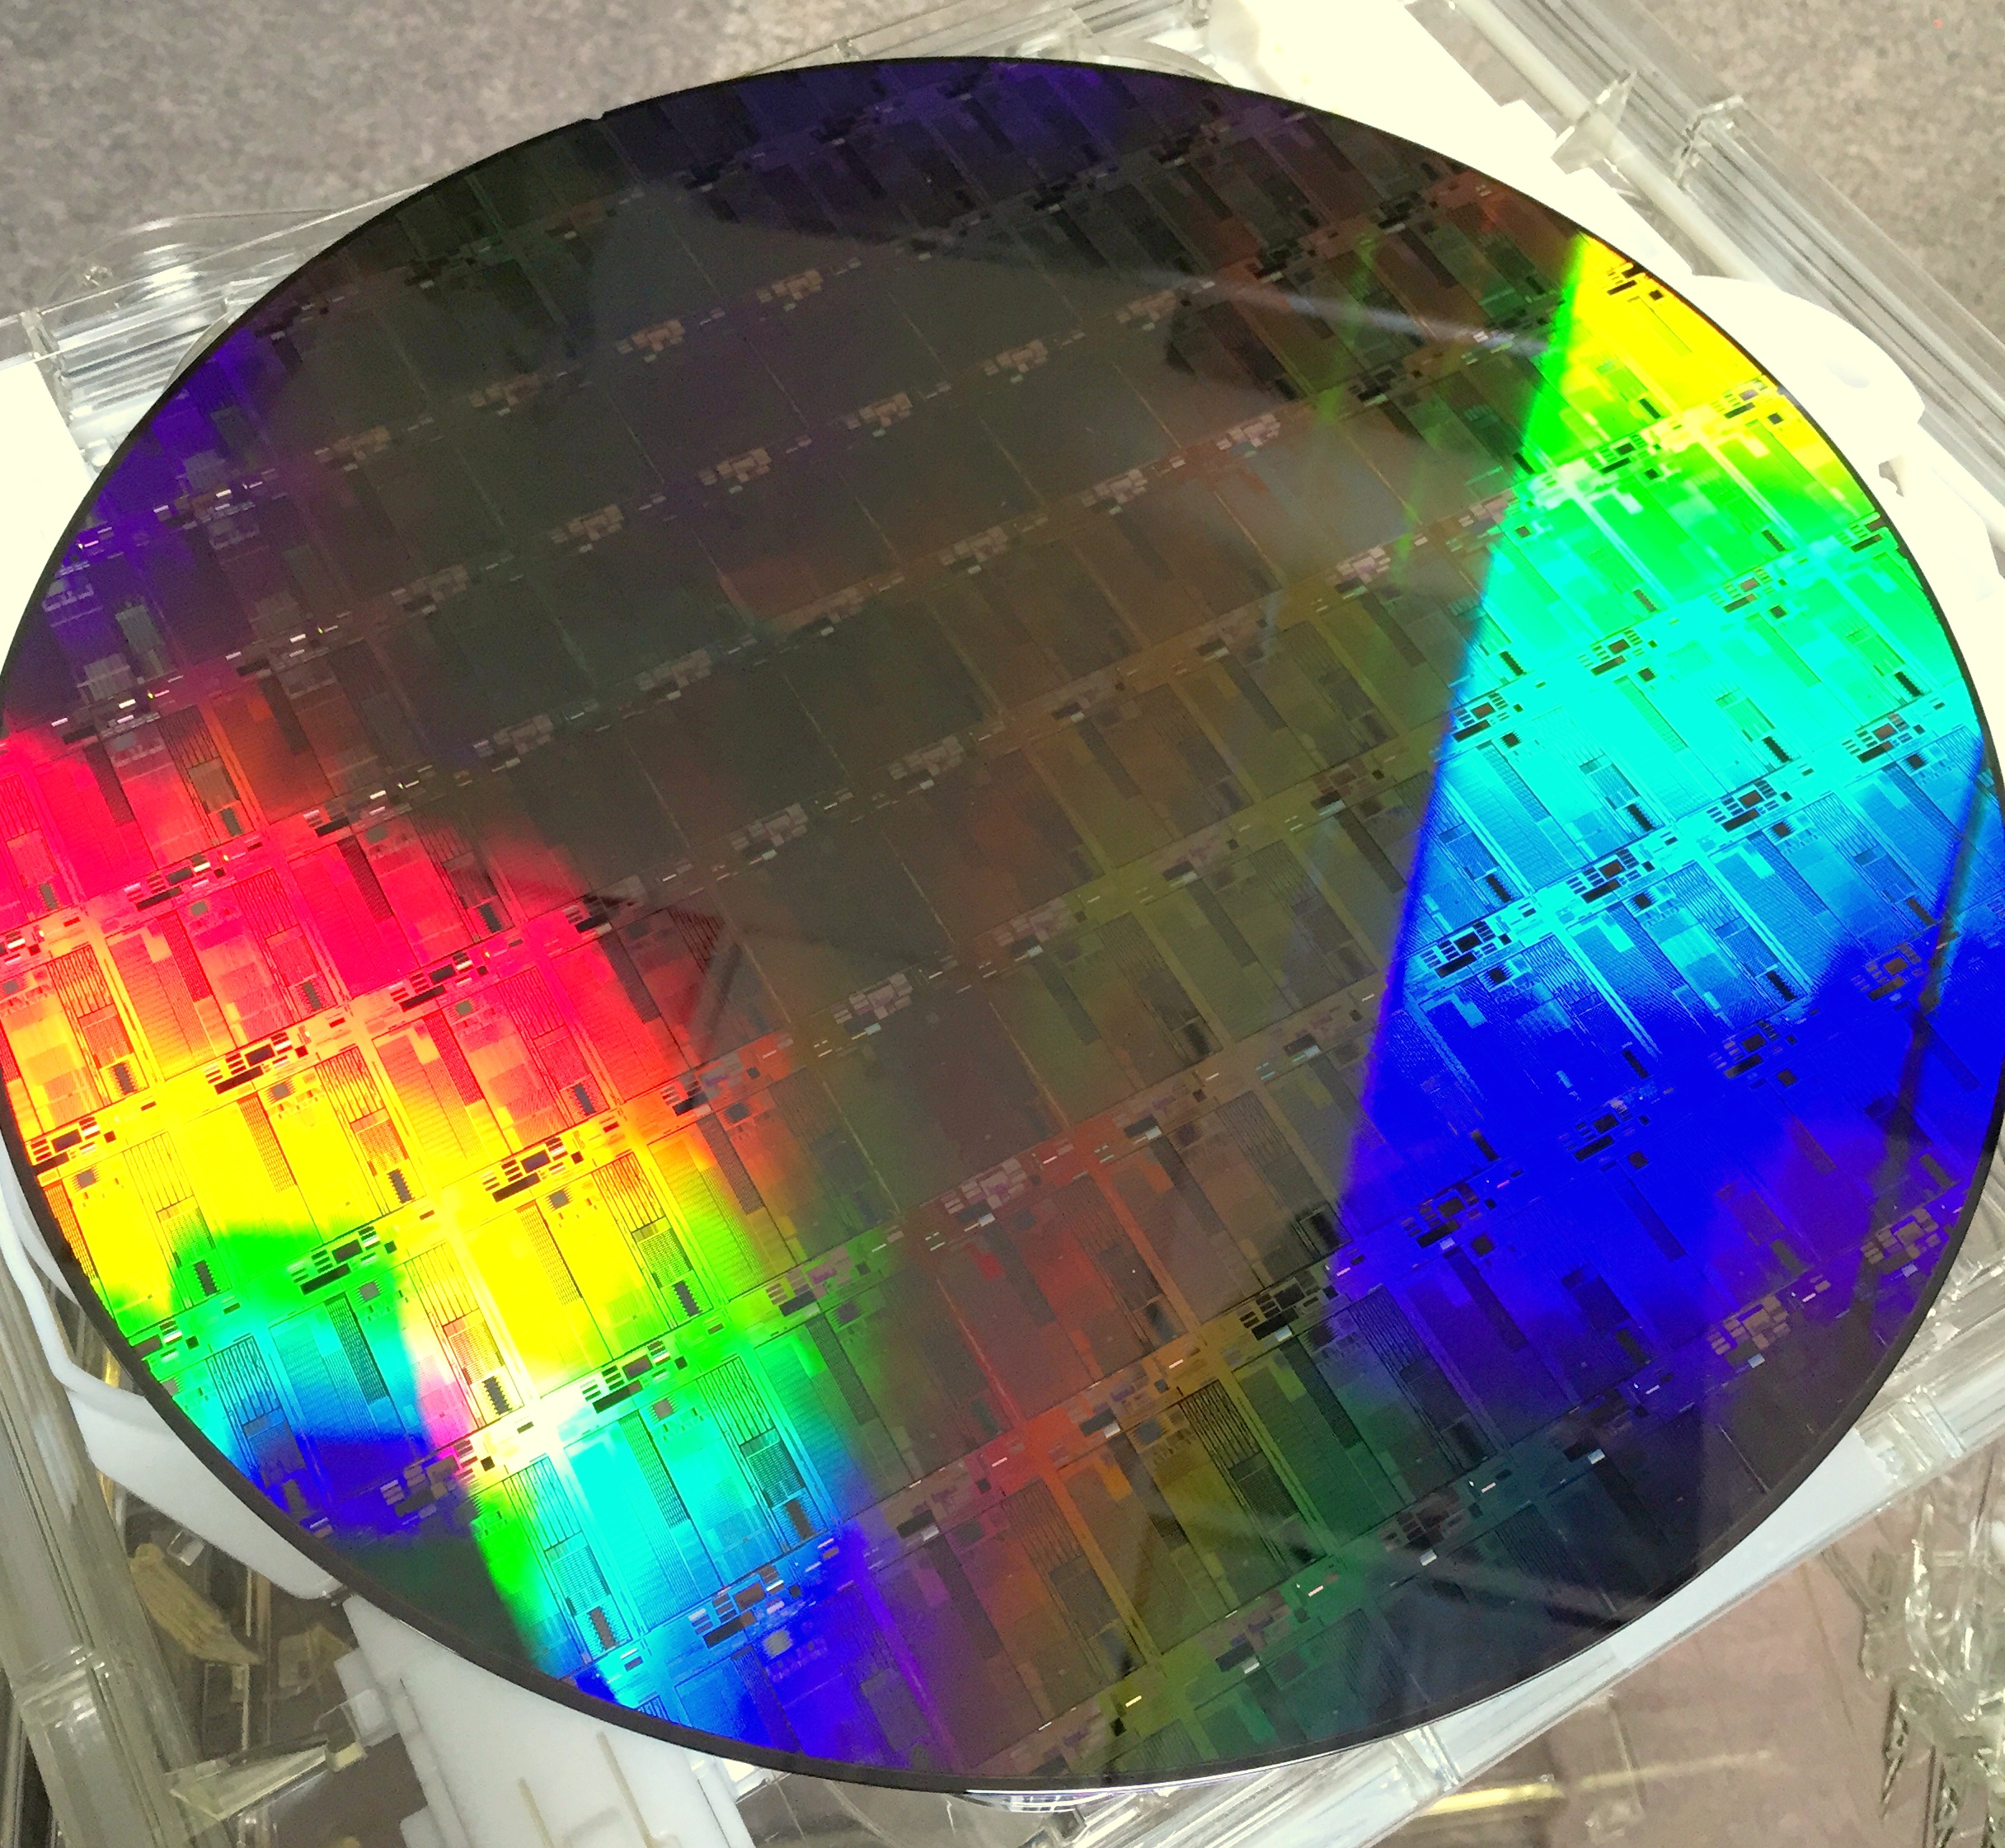 Global Silicon Photonics Market Disrupted by 100G Transmitter Trend